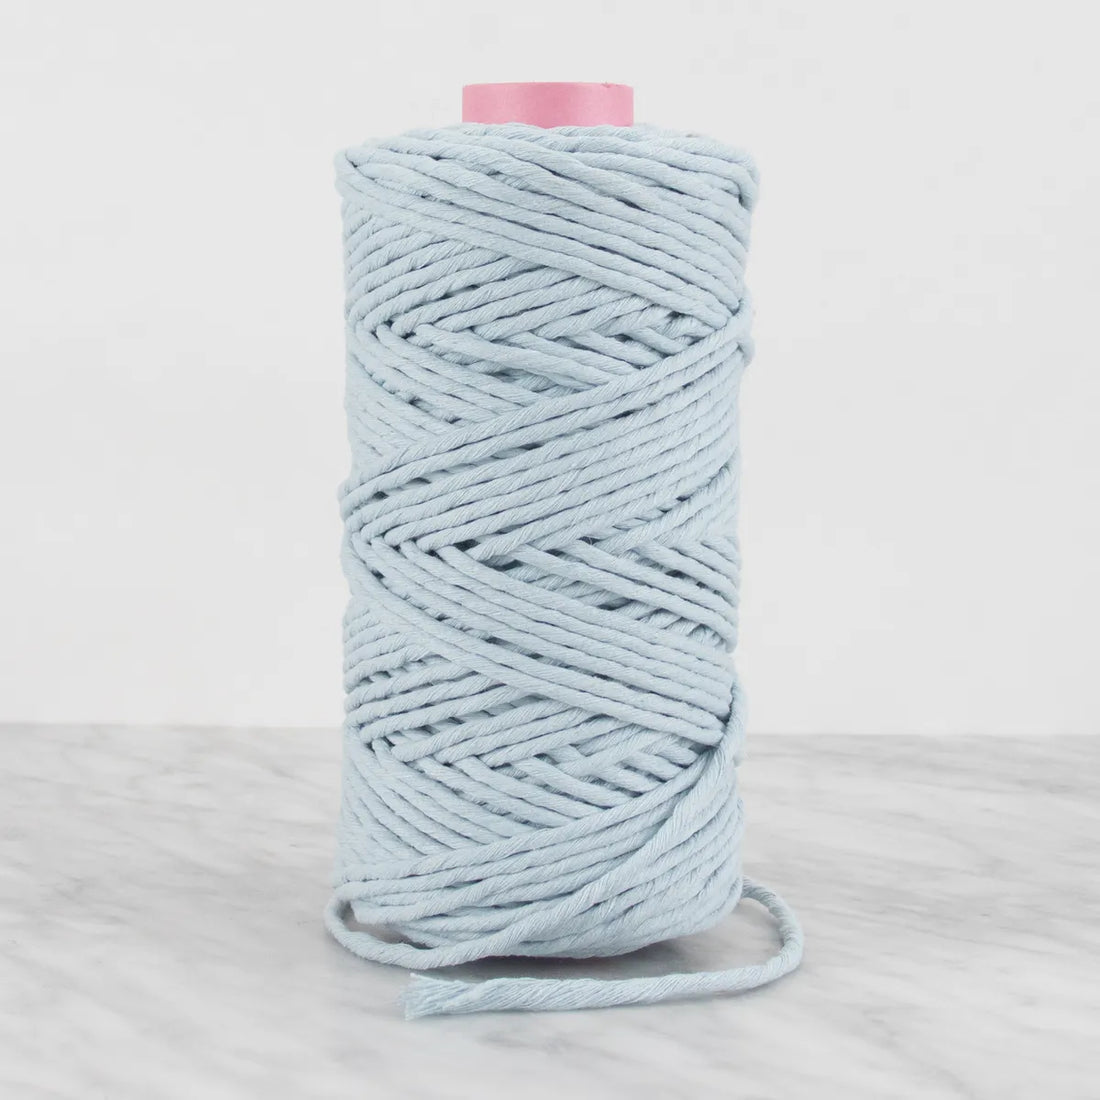 5 mm Recycled Cotton String 0.5 kg - Sky